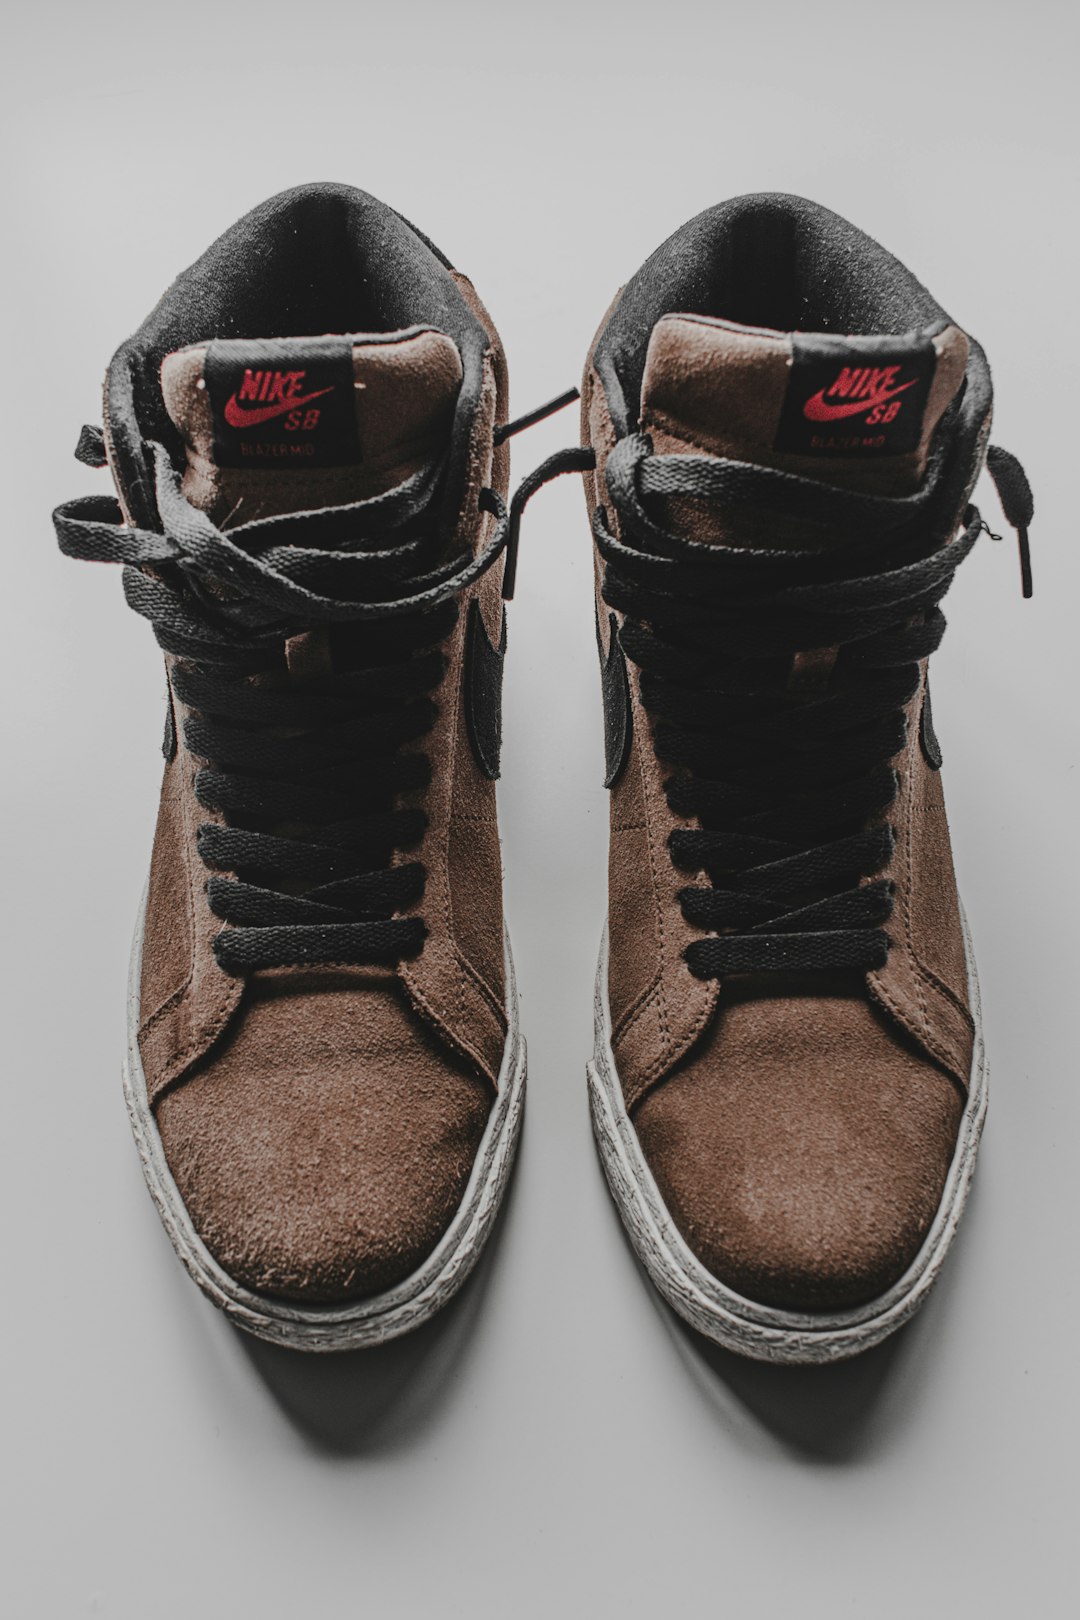 brown and black nike shoes